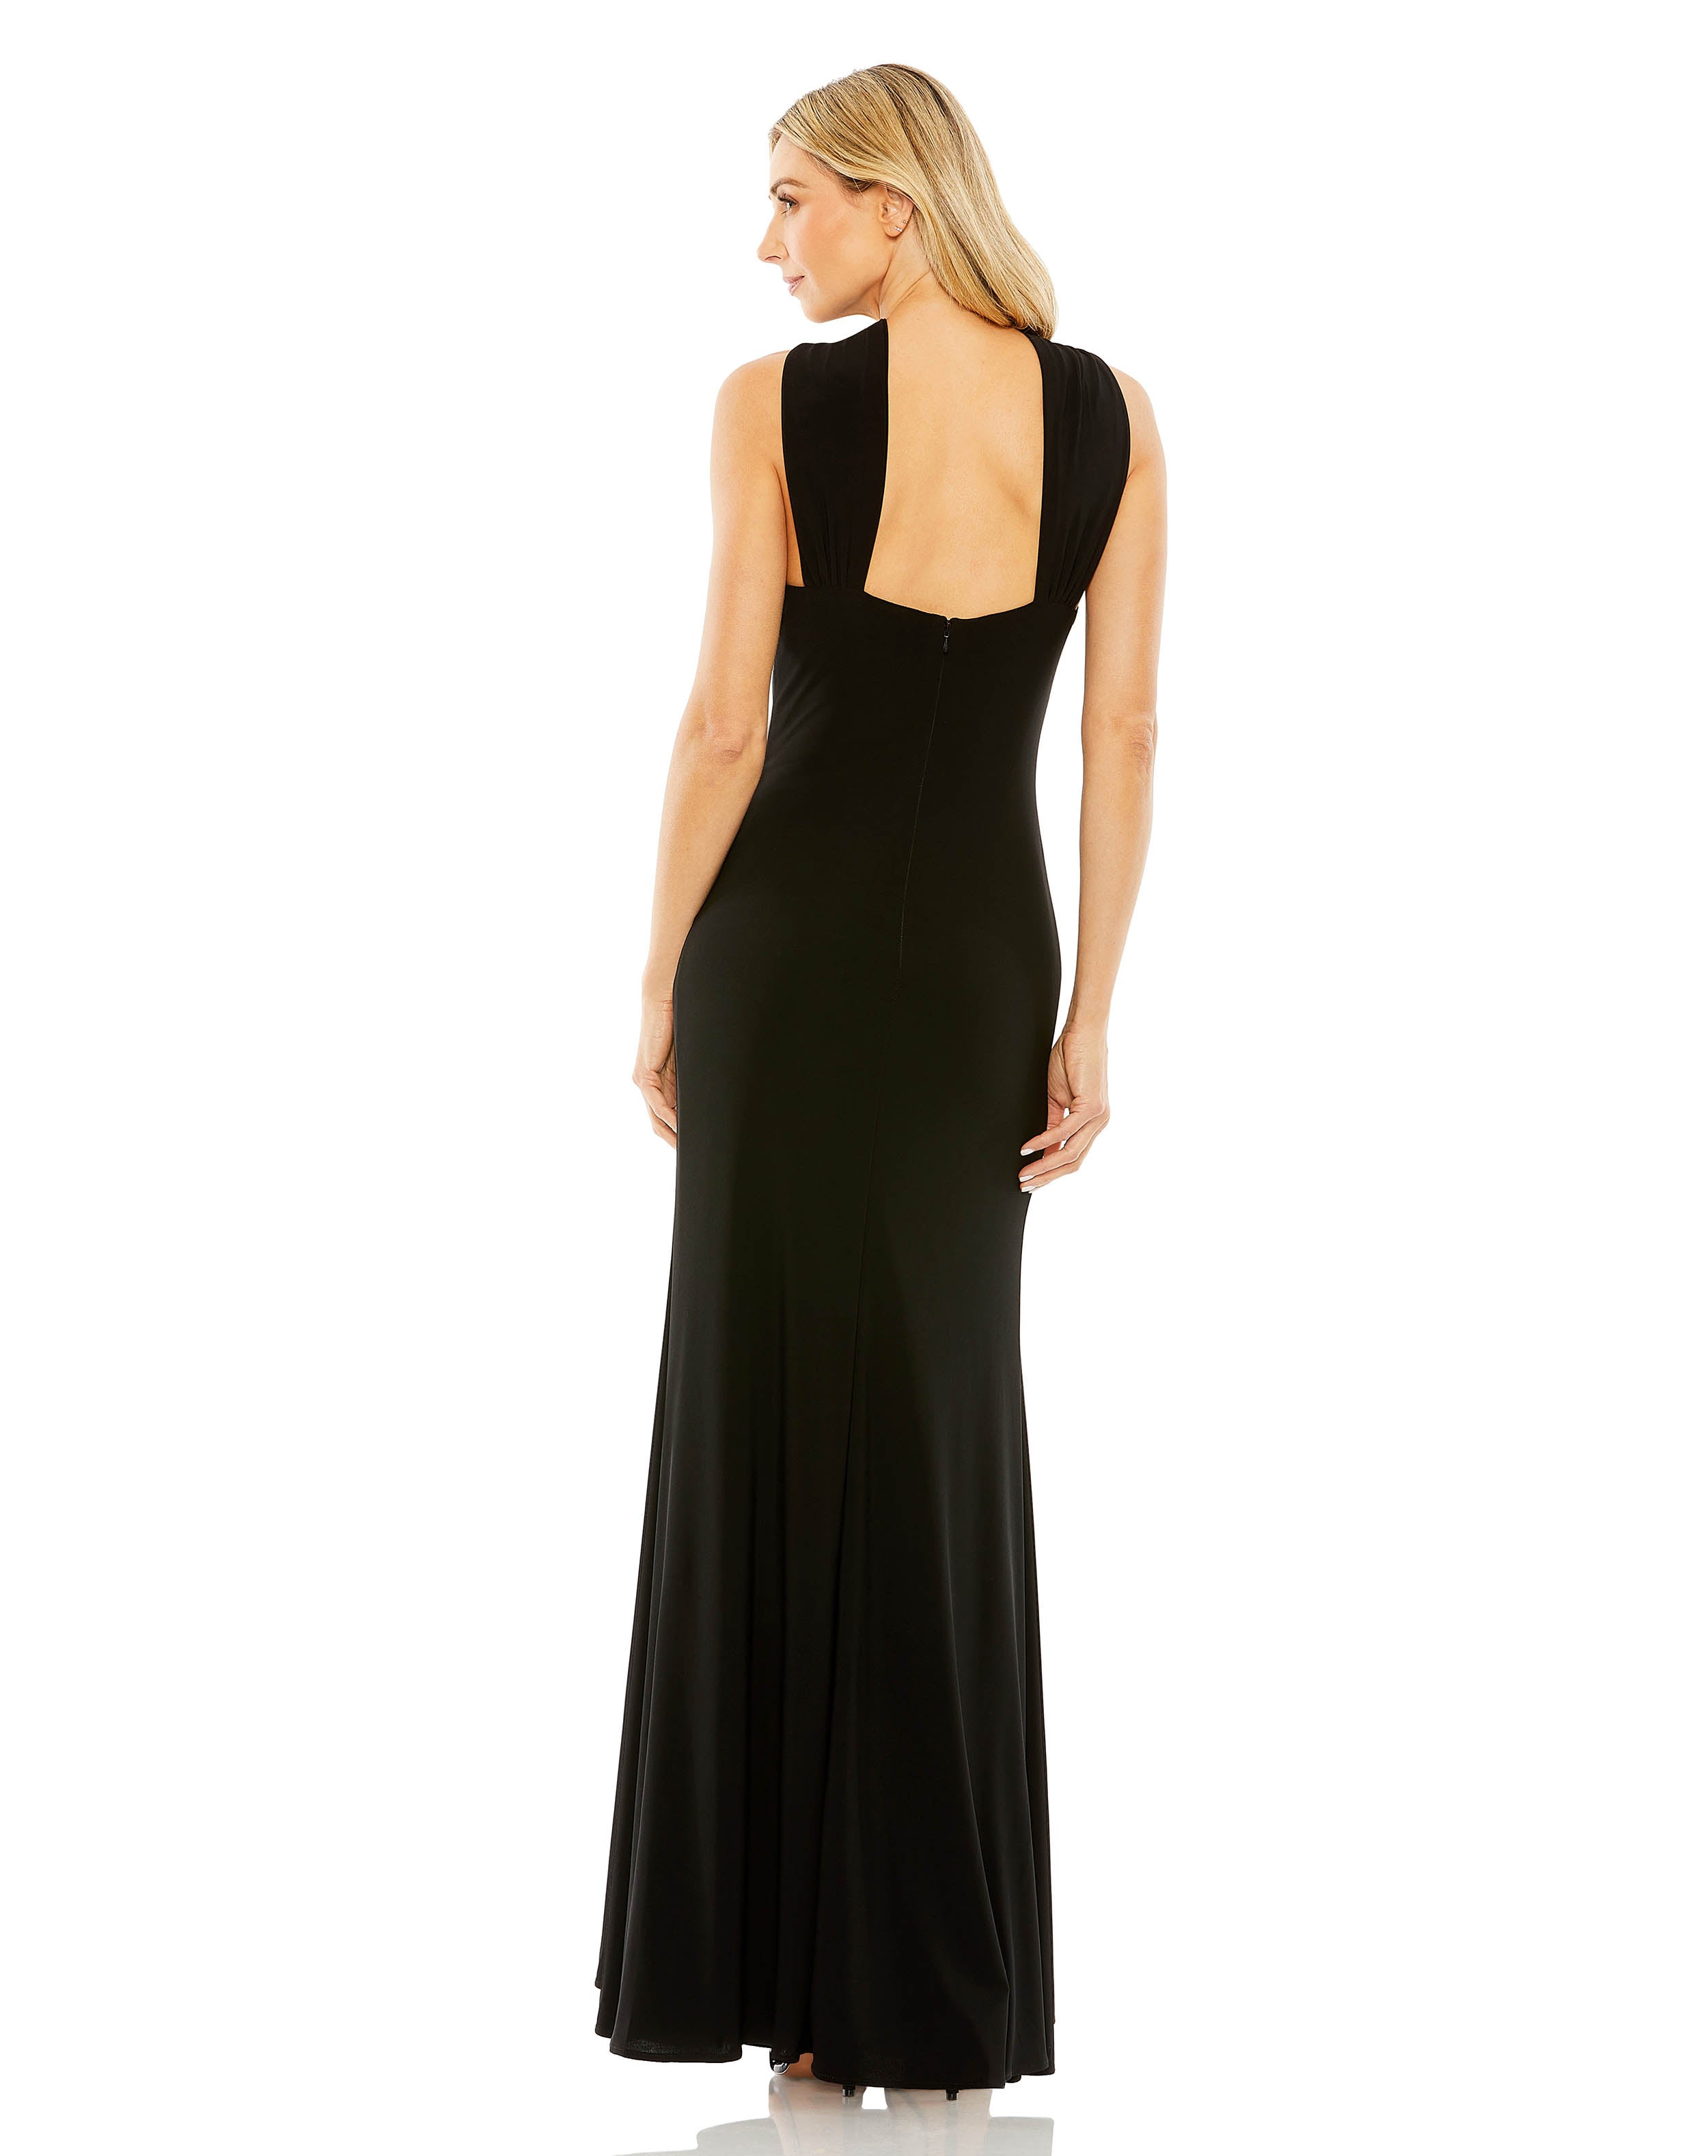 Knotted Halter Neck Keyhole Jersey Gown